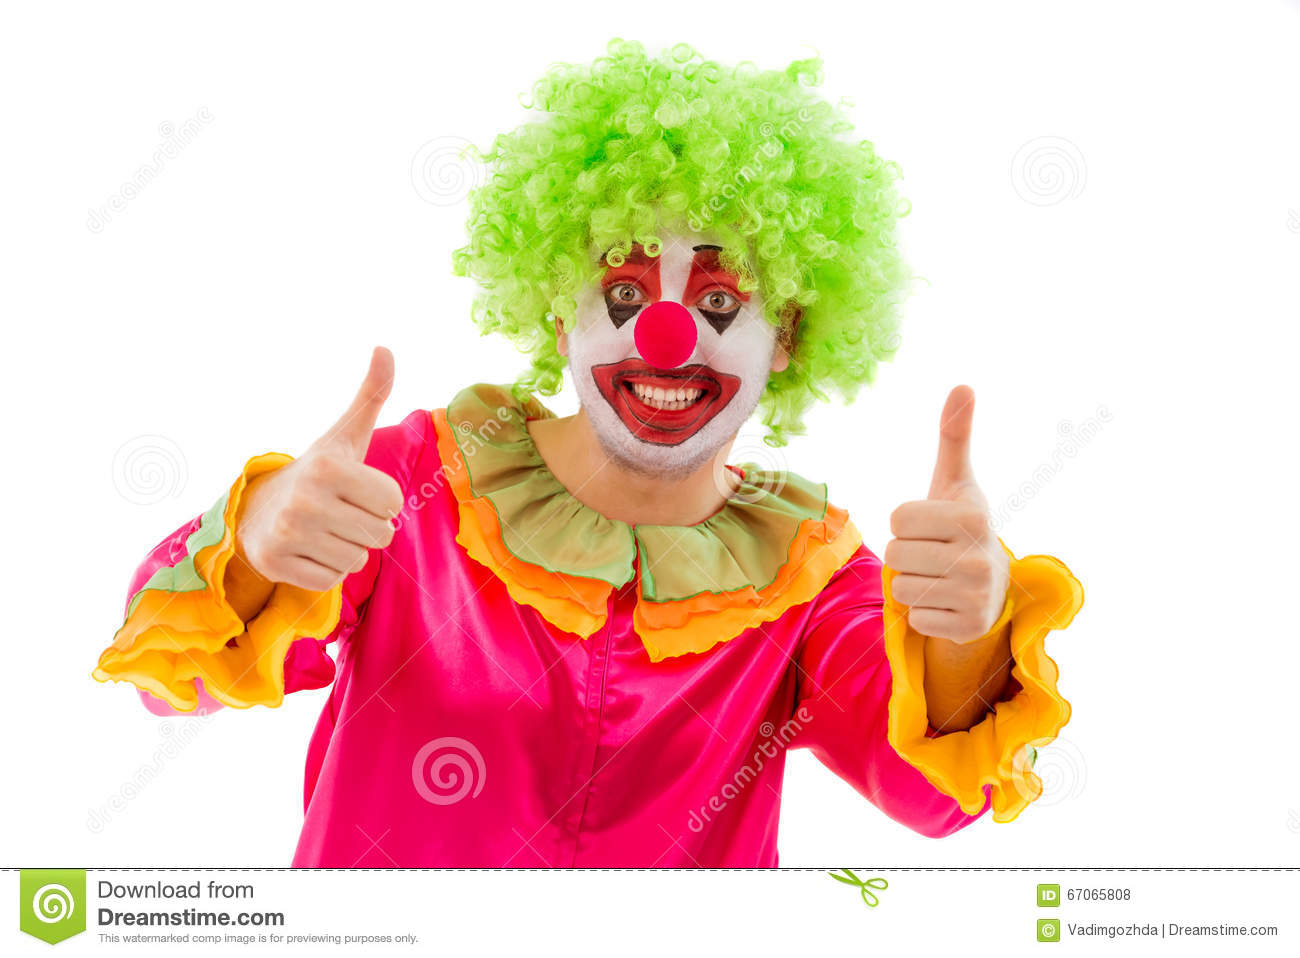 funny-playful-clown-portrait-green-wig-showing-ok-sign-looking-camera-smiling-isolated-white-background-67065808.jpg